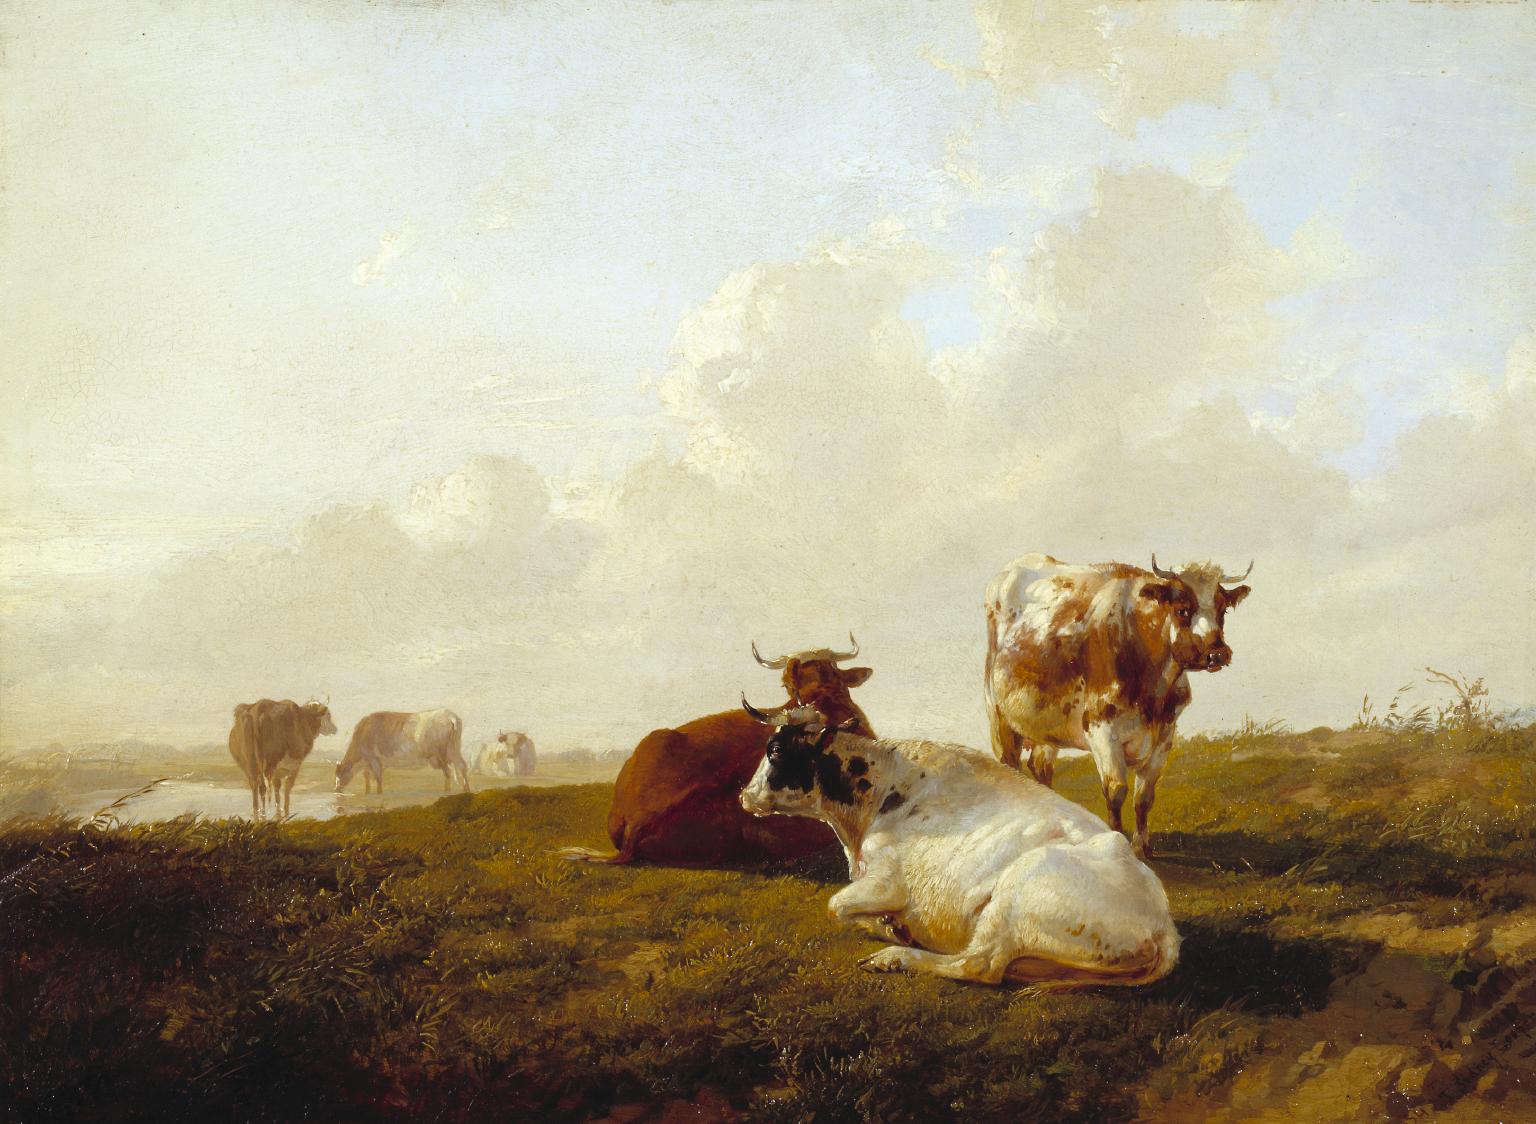 Landscape and Cattle 1854 Thomas Sidney Cooper 1803-1902 Bequeathed by Henry Vaughan 1900 http://www.tate.org.uk/art/work/N01800